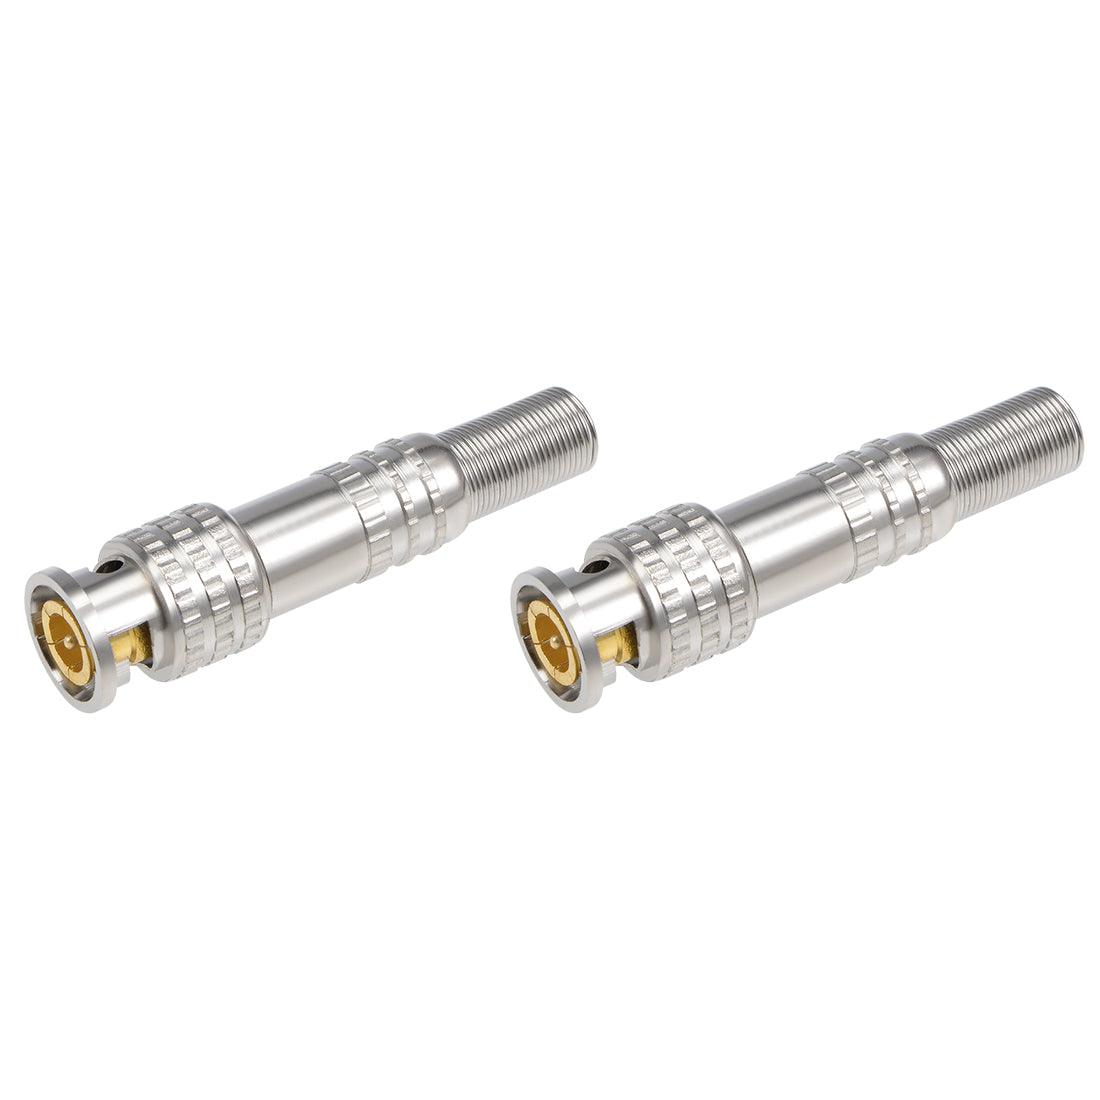 uxcell Uxcell 2pcs Solderless BNC Male Connector for CCTV Camera Coaxial Cable 56mm Length